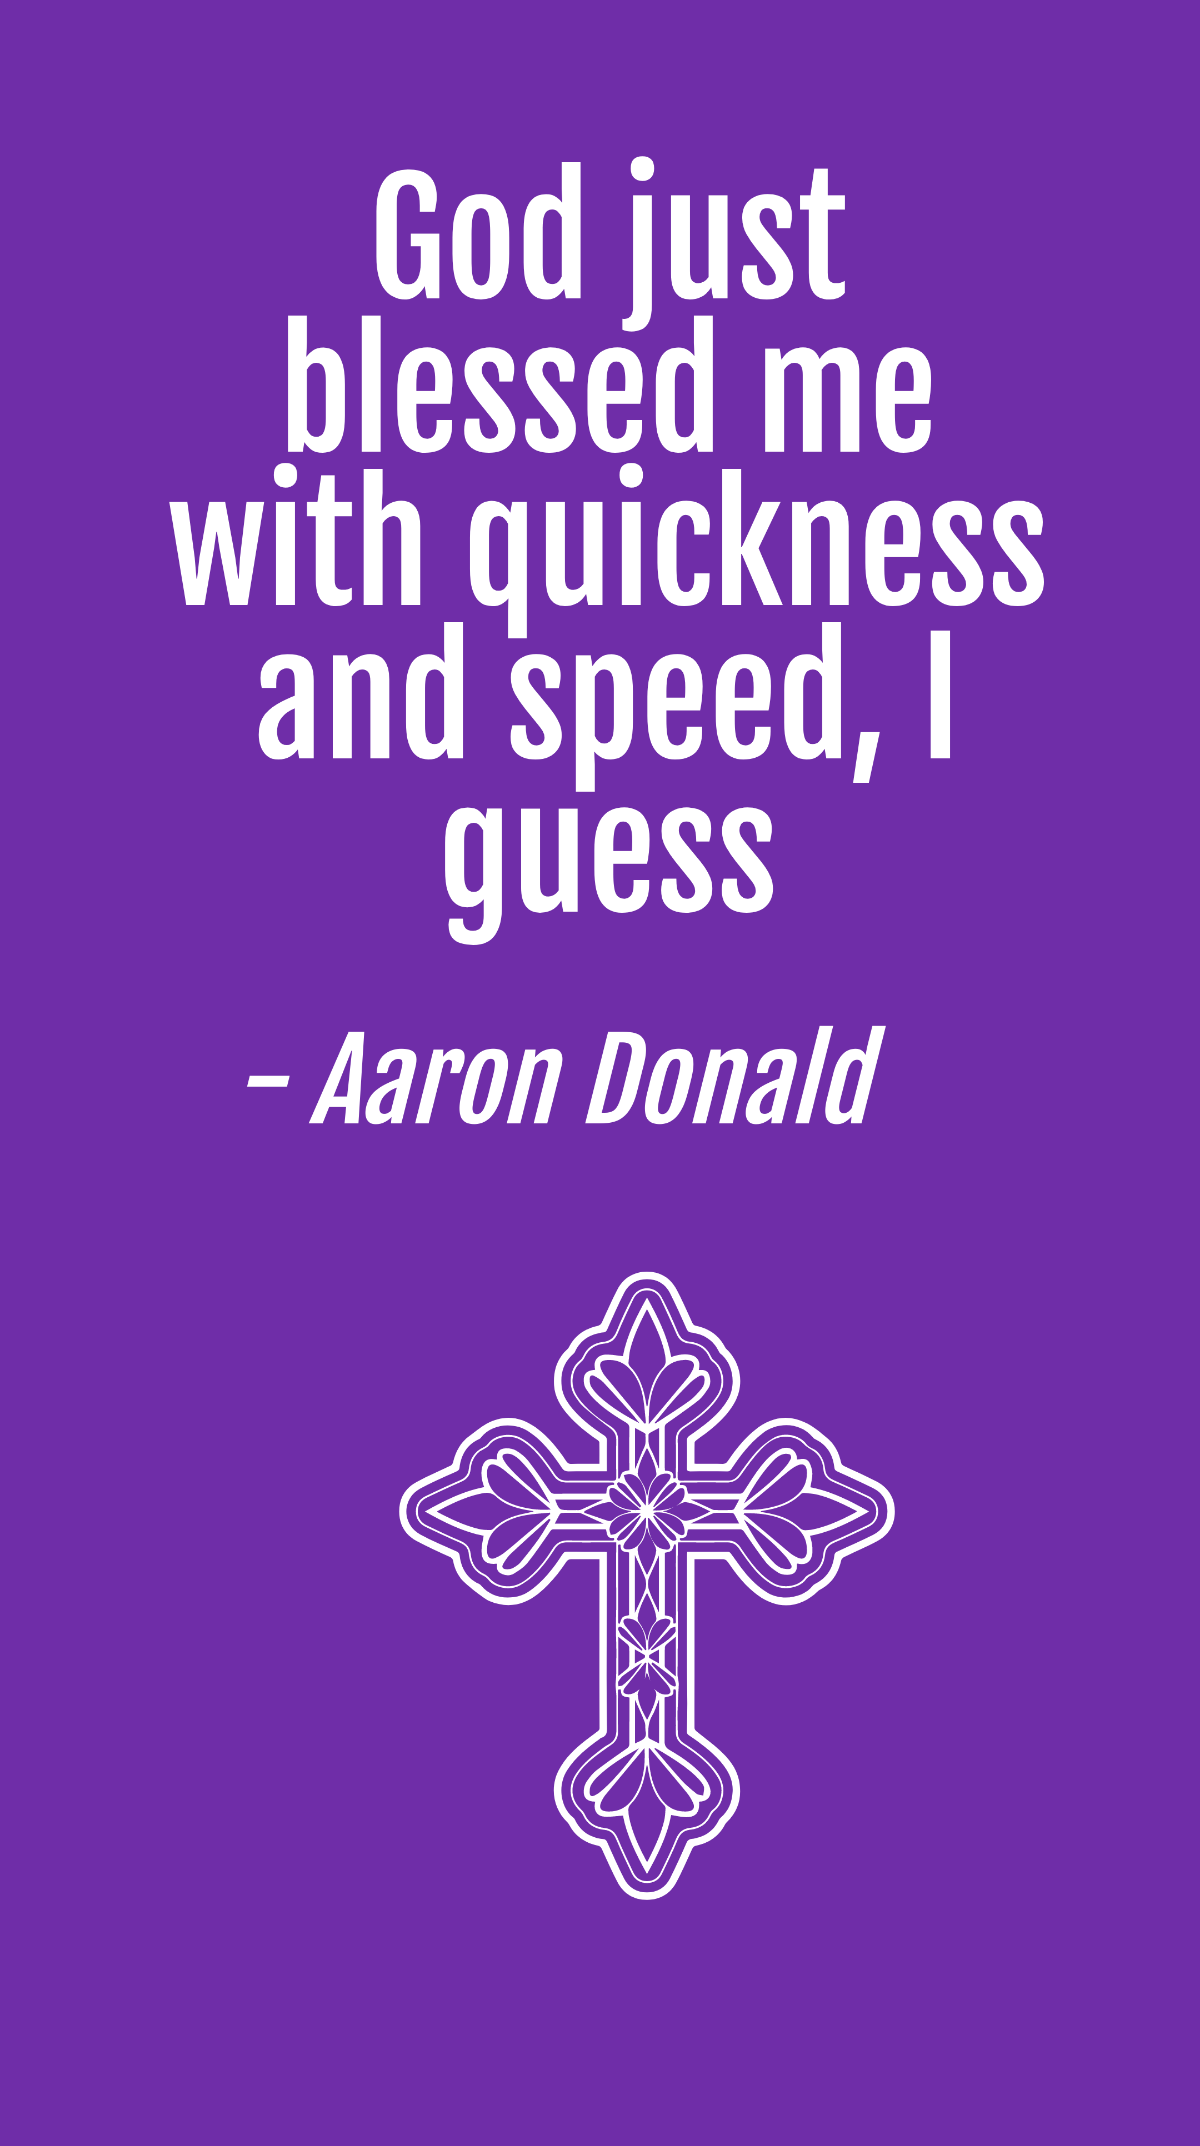 Free Aaron Donald - God just blessed me with quickness and speed, I guess Template